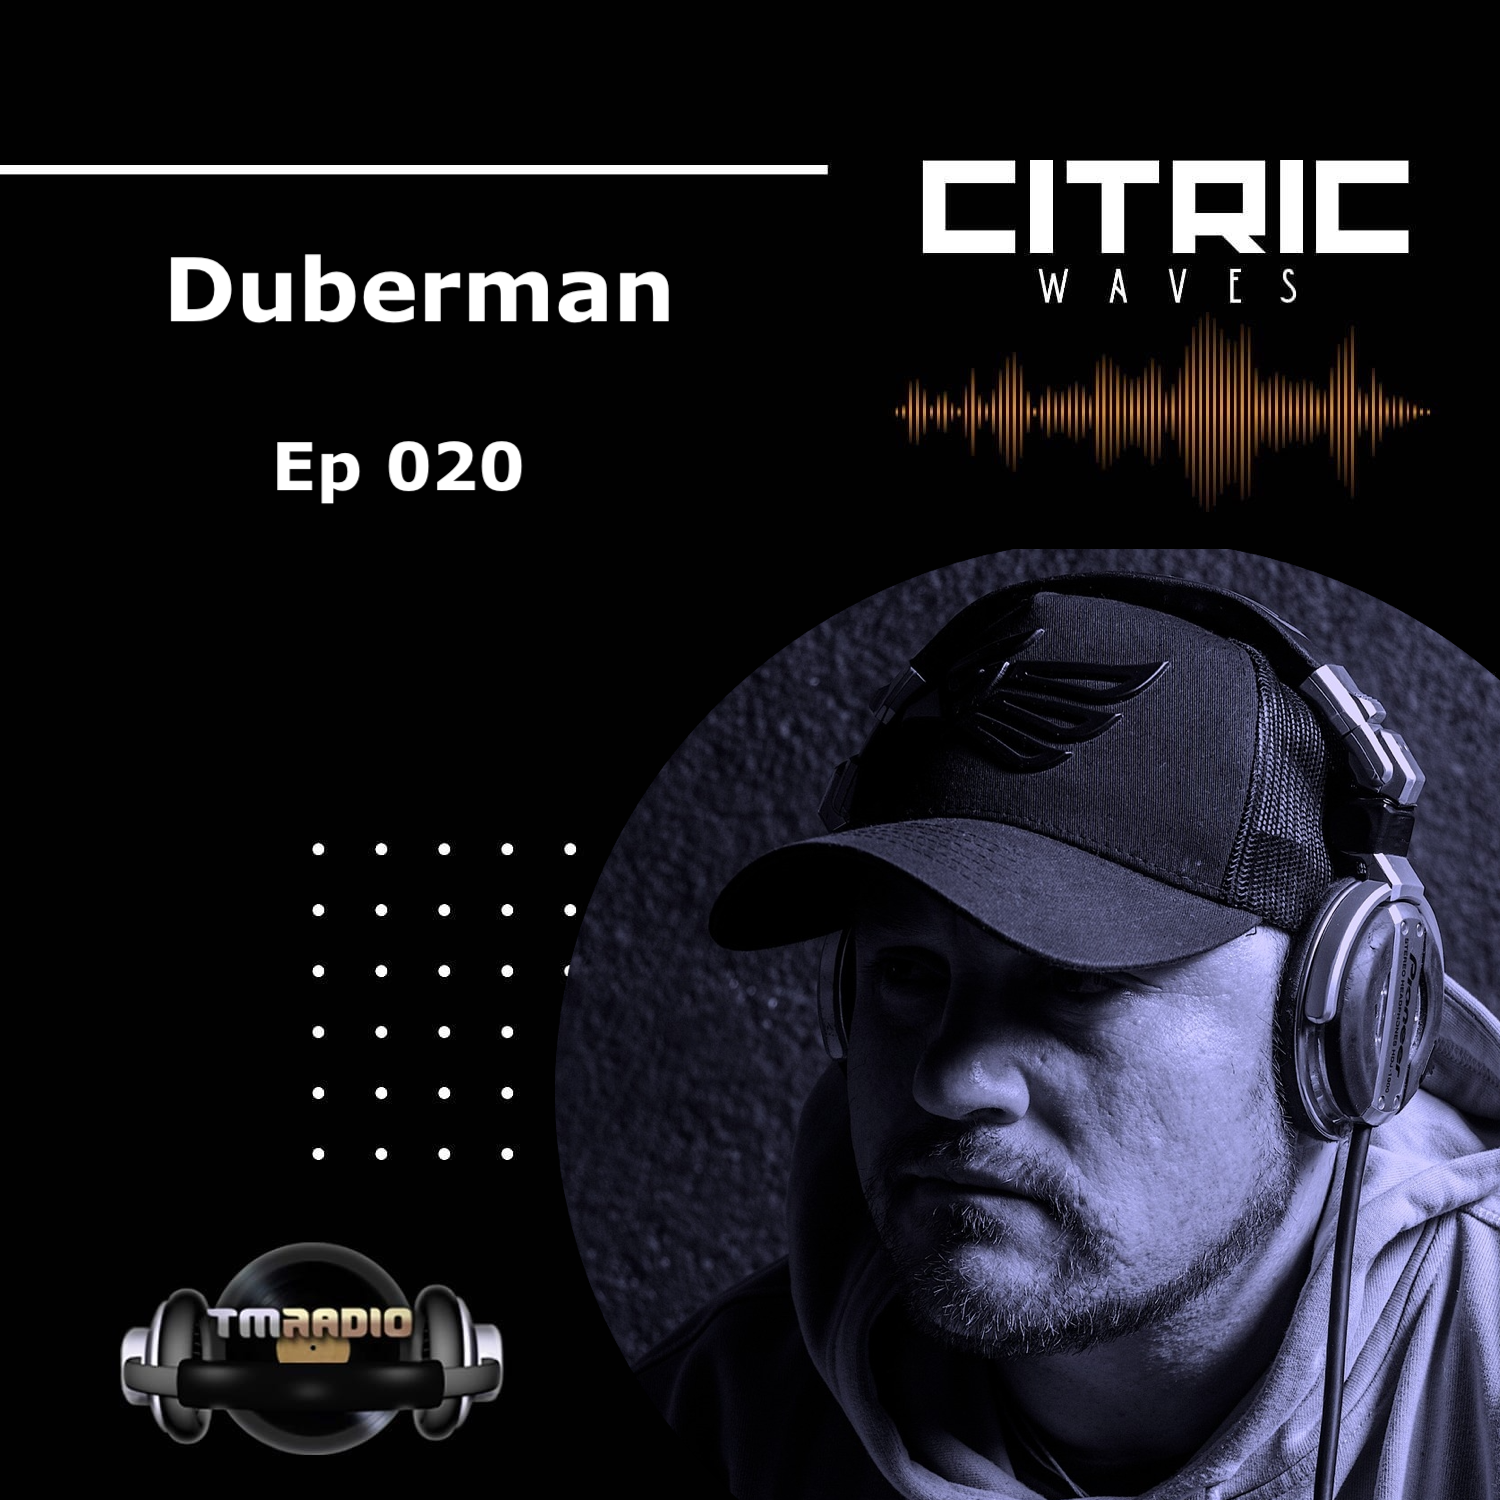 Citric Waves 020 Duberman (from April 4th)